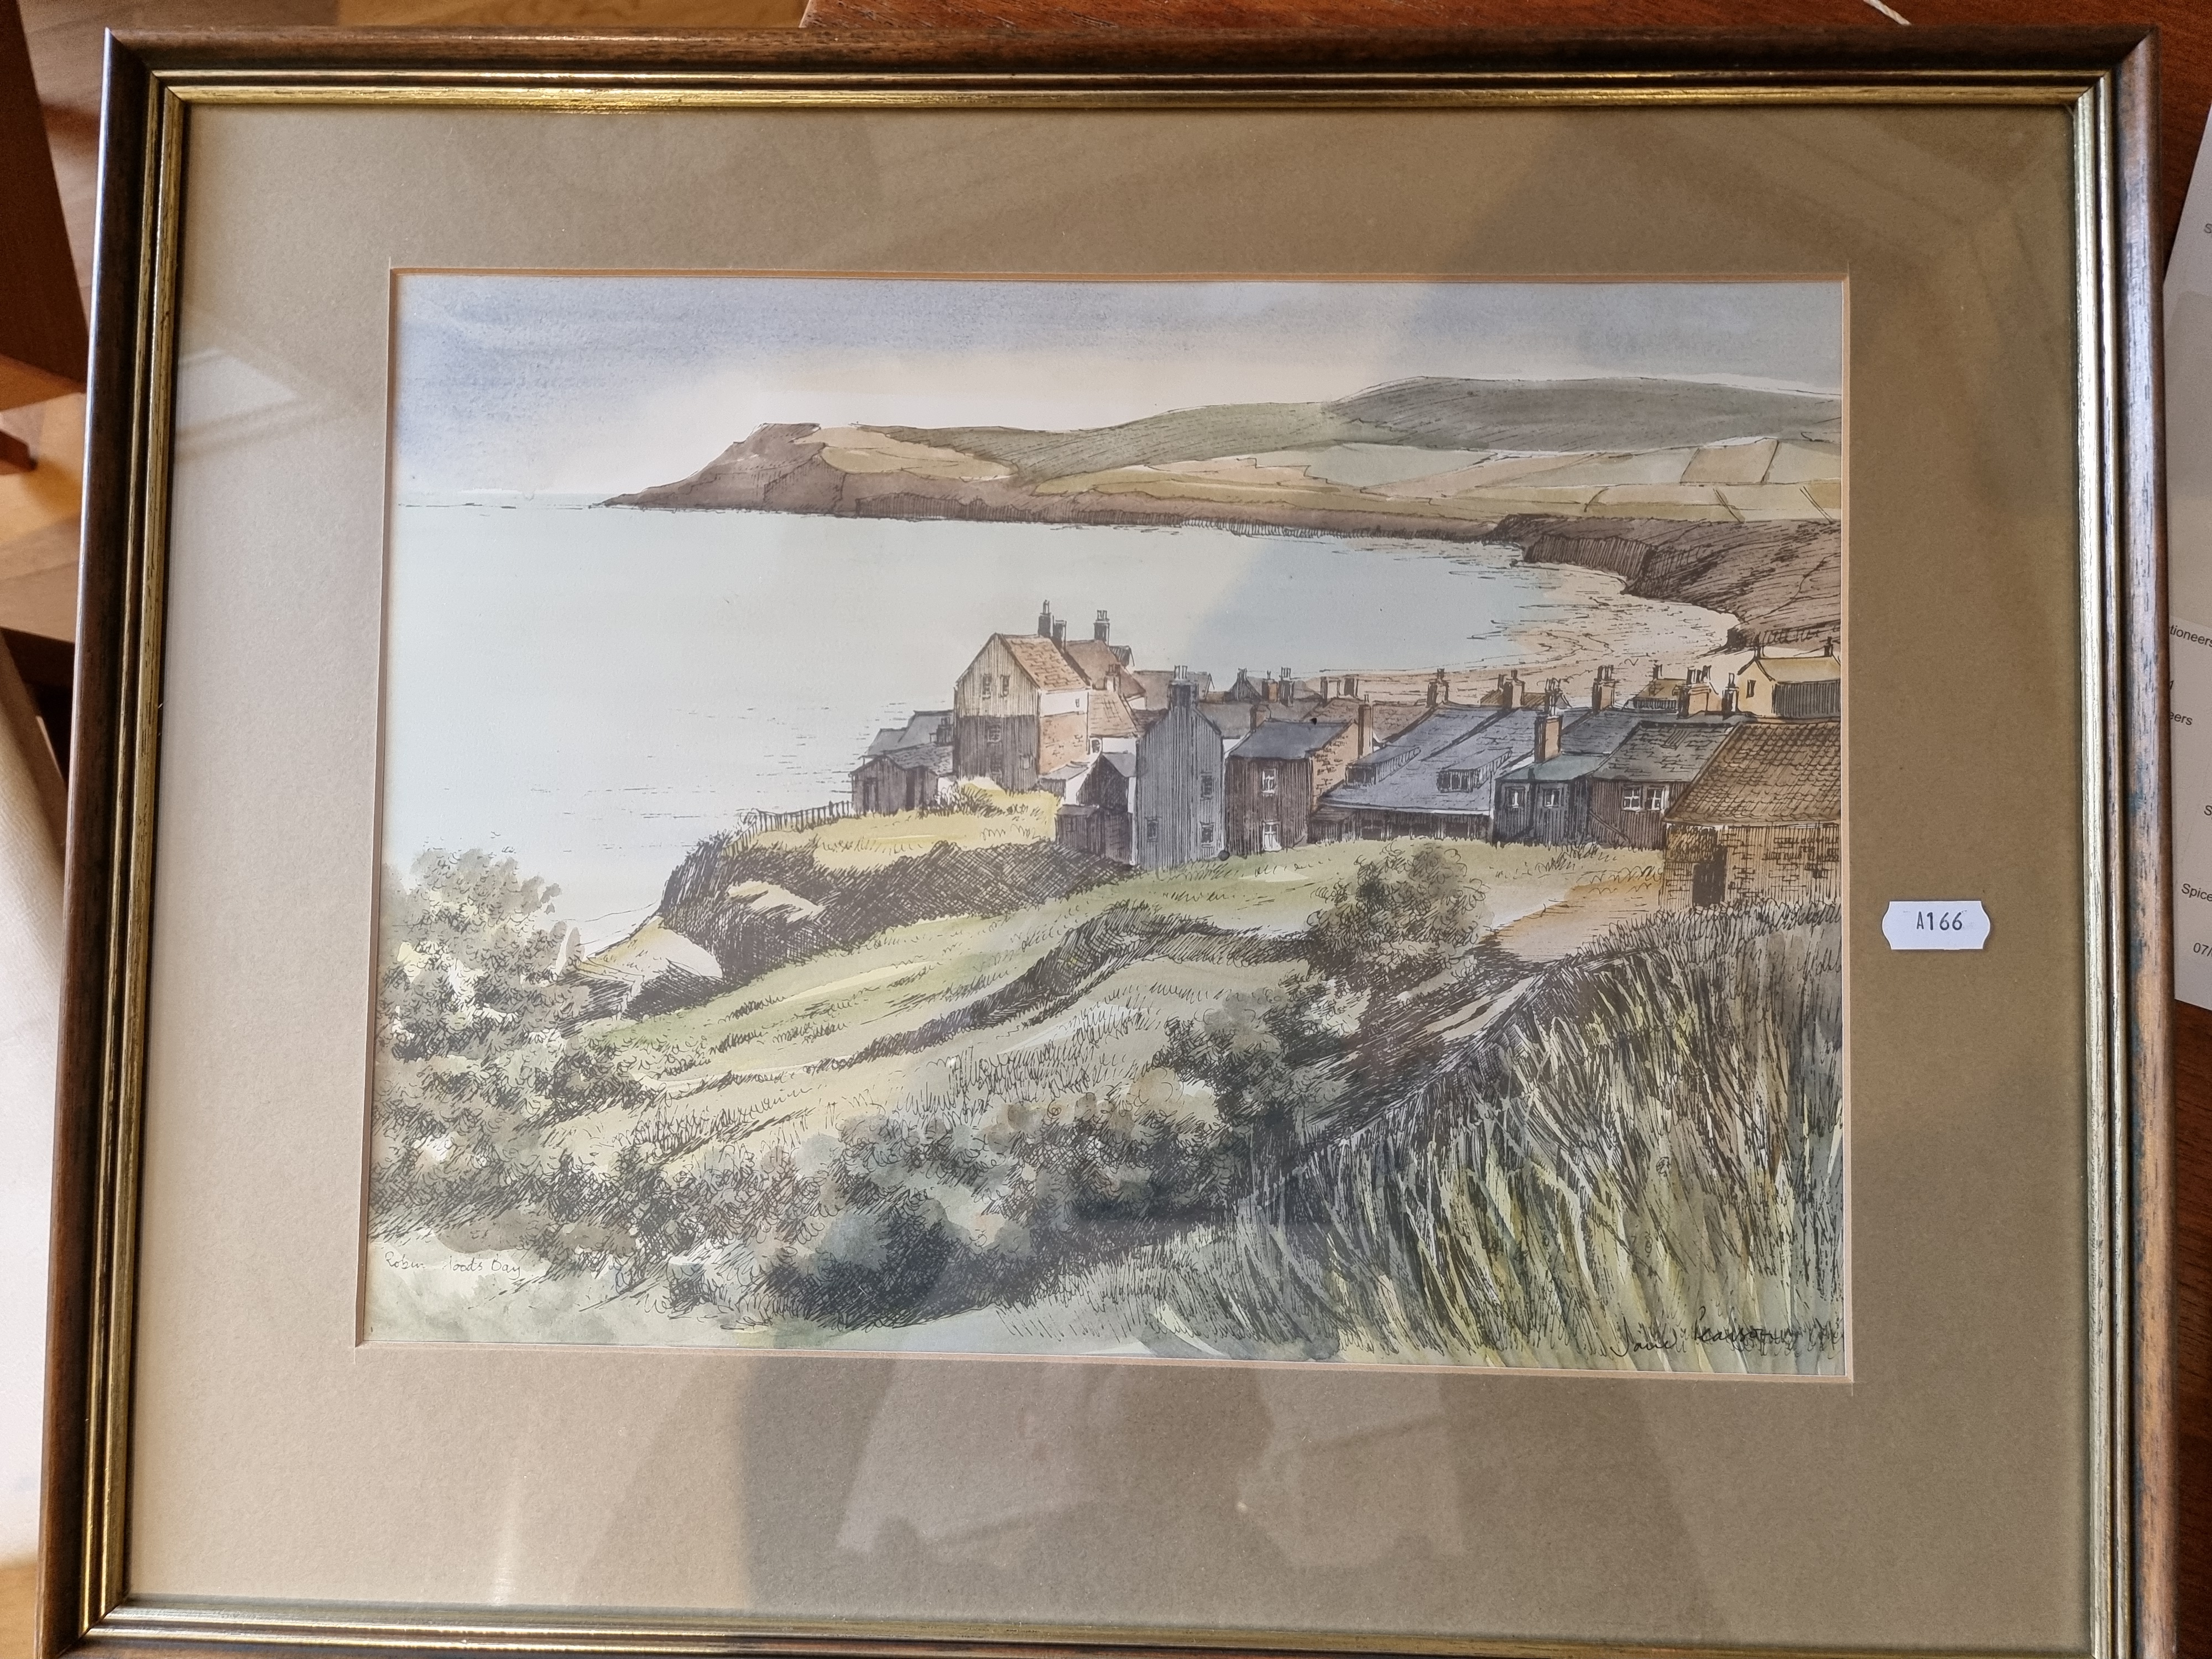 Jane Pearson, Robin Hoods Bay, watercolour and pen, 27 x 37cm, a print and 3 mirrors